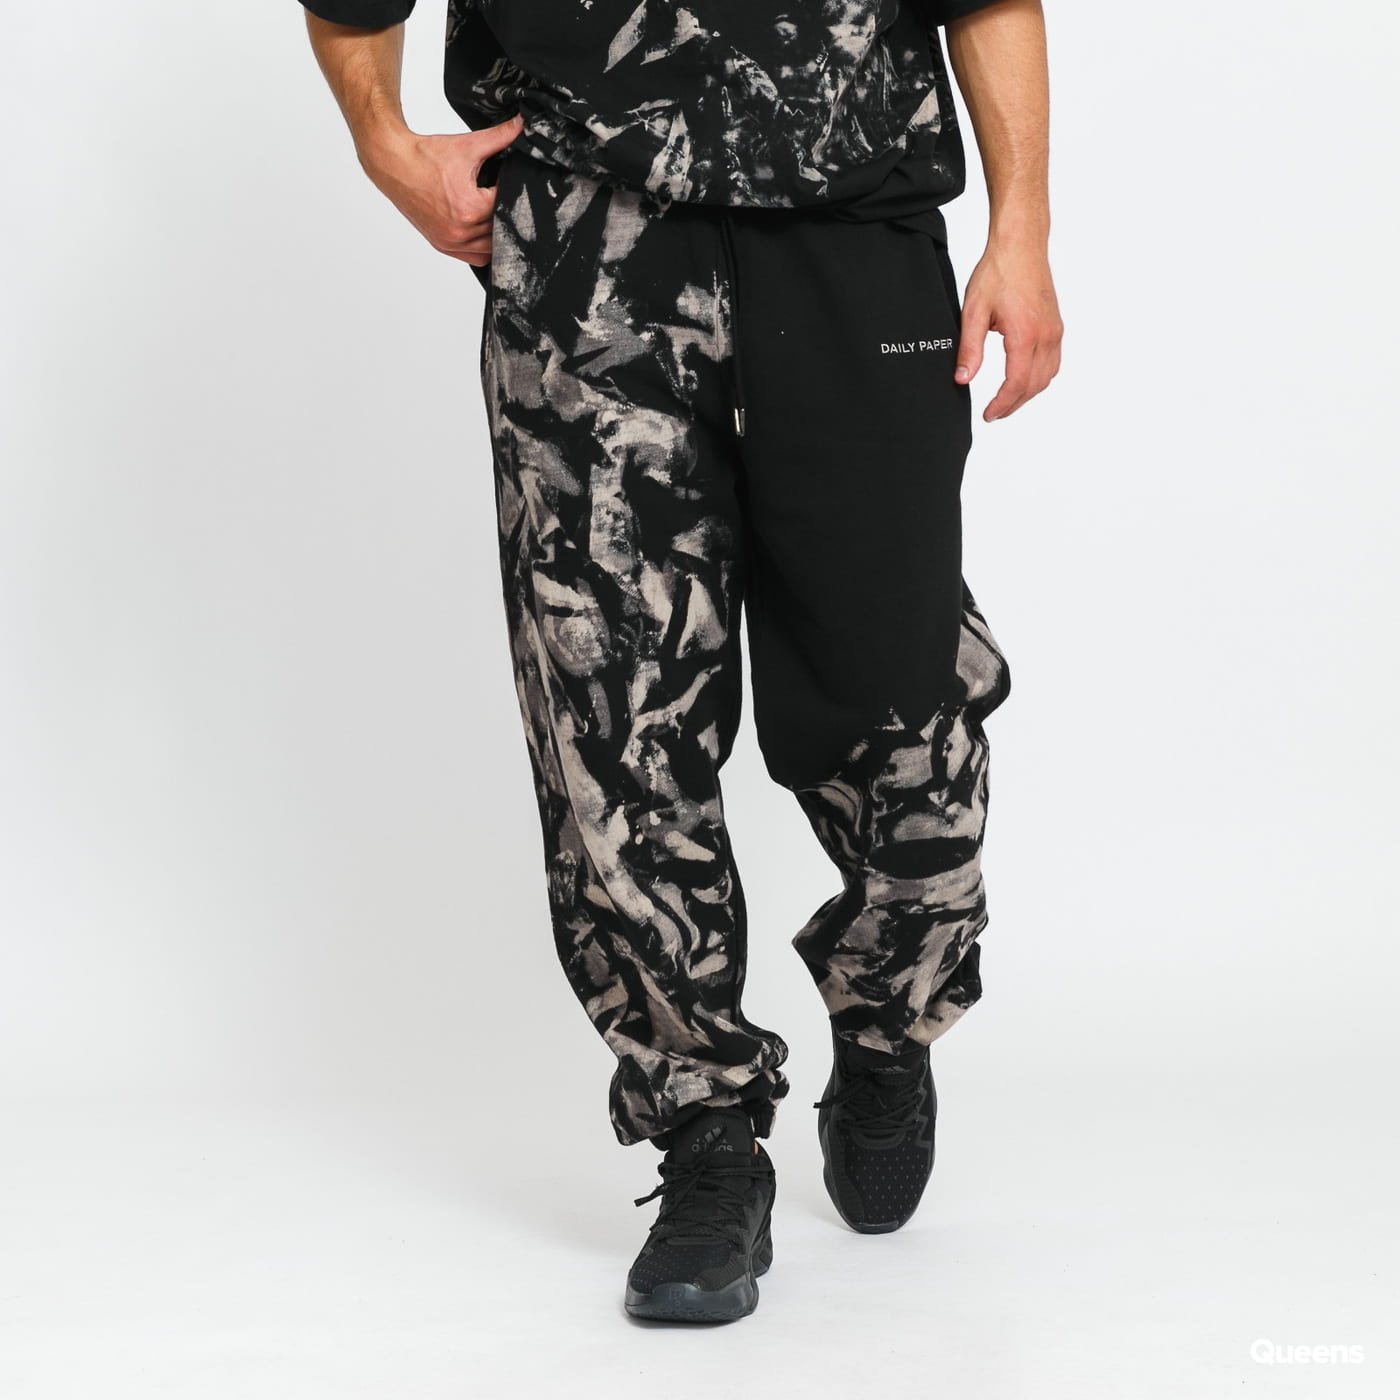 Titolo | Shop Wmns Daily Paper Ezea Cargo Pants here at Titolo